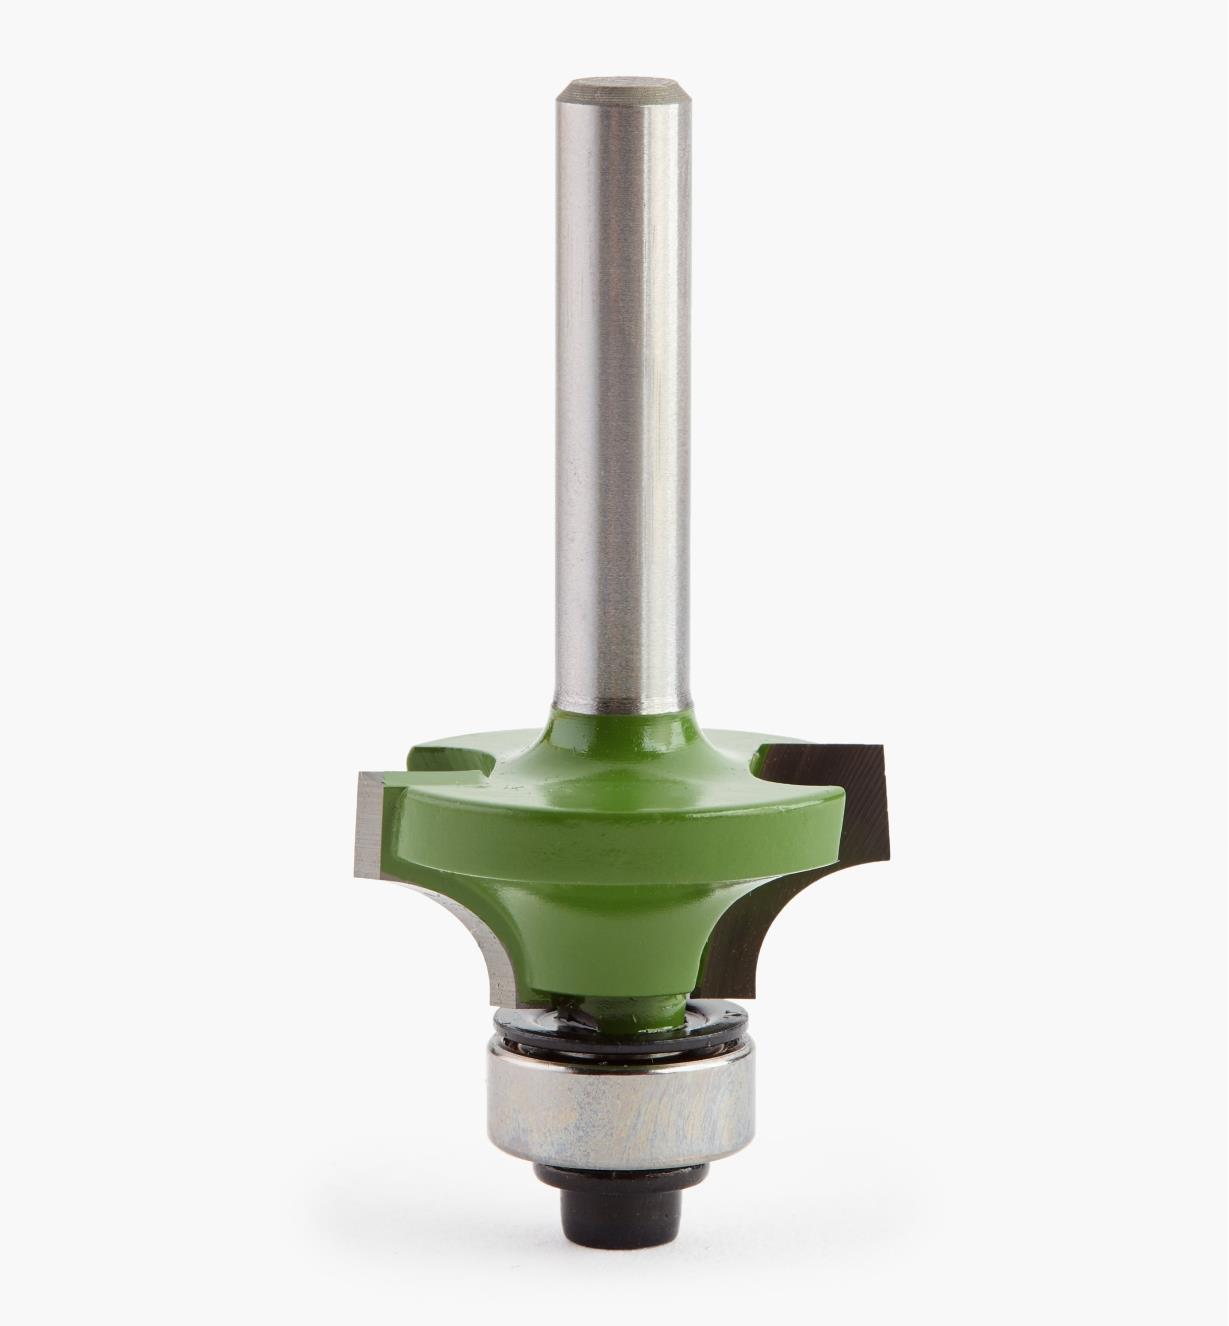 1 Inch Roundover Router Bit Online, 57% OFF | www.campingcanyelles.com